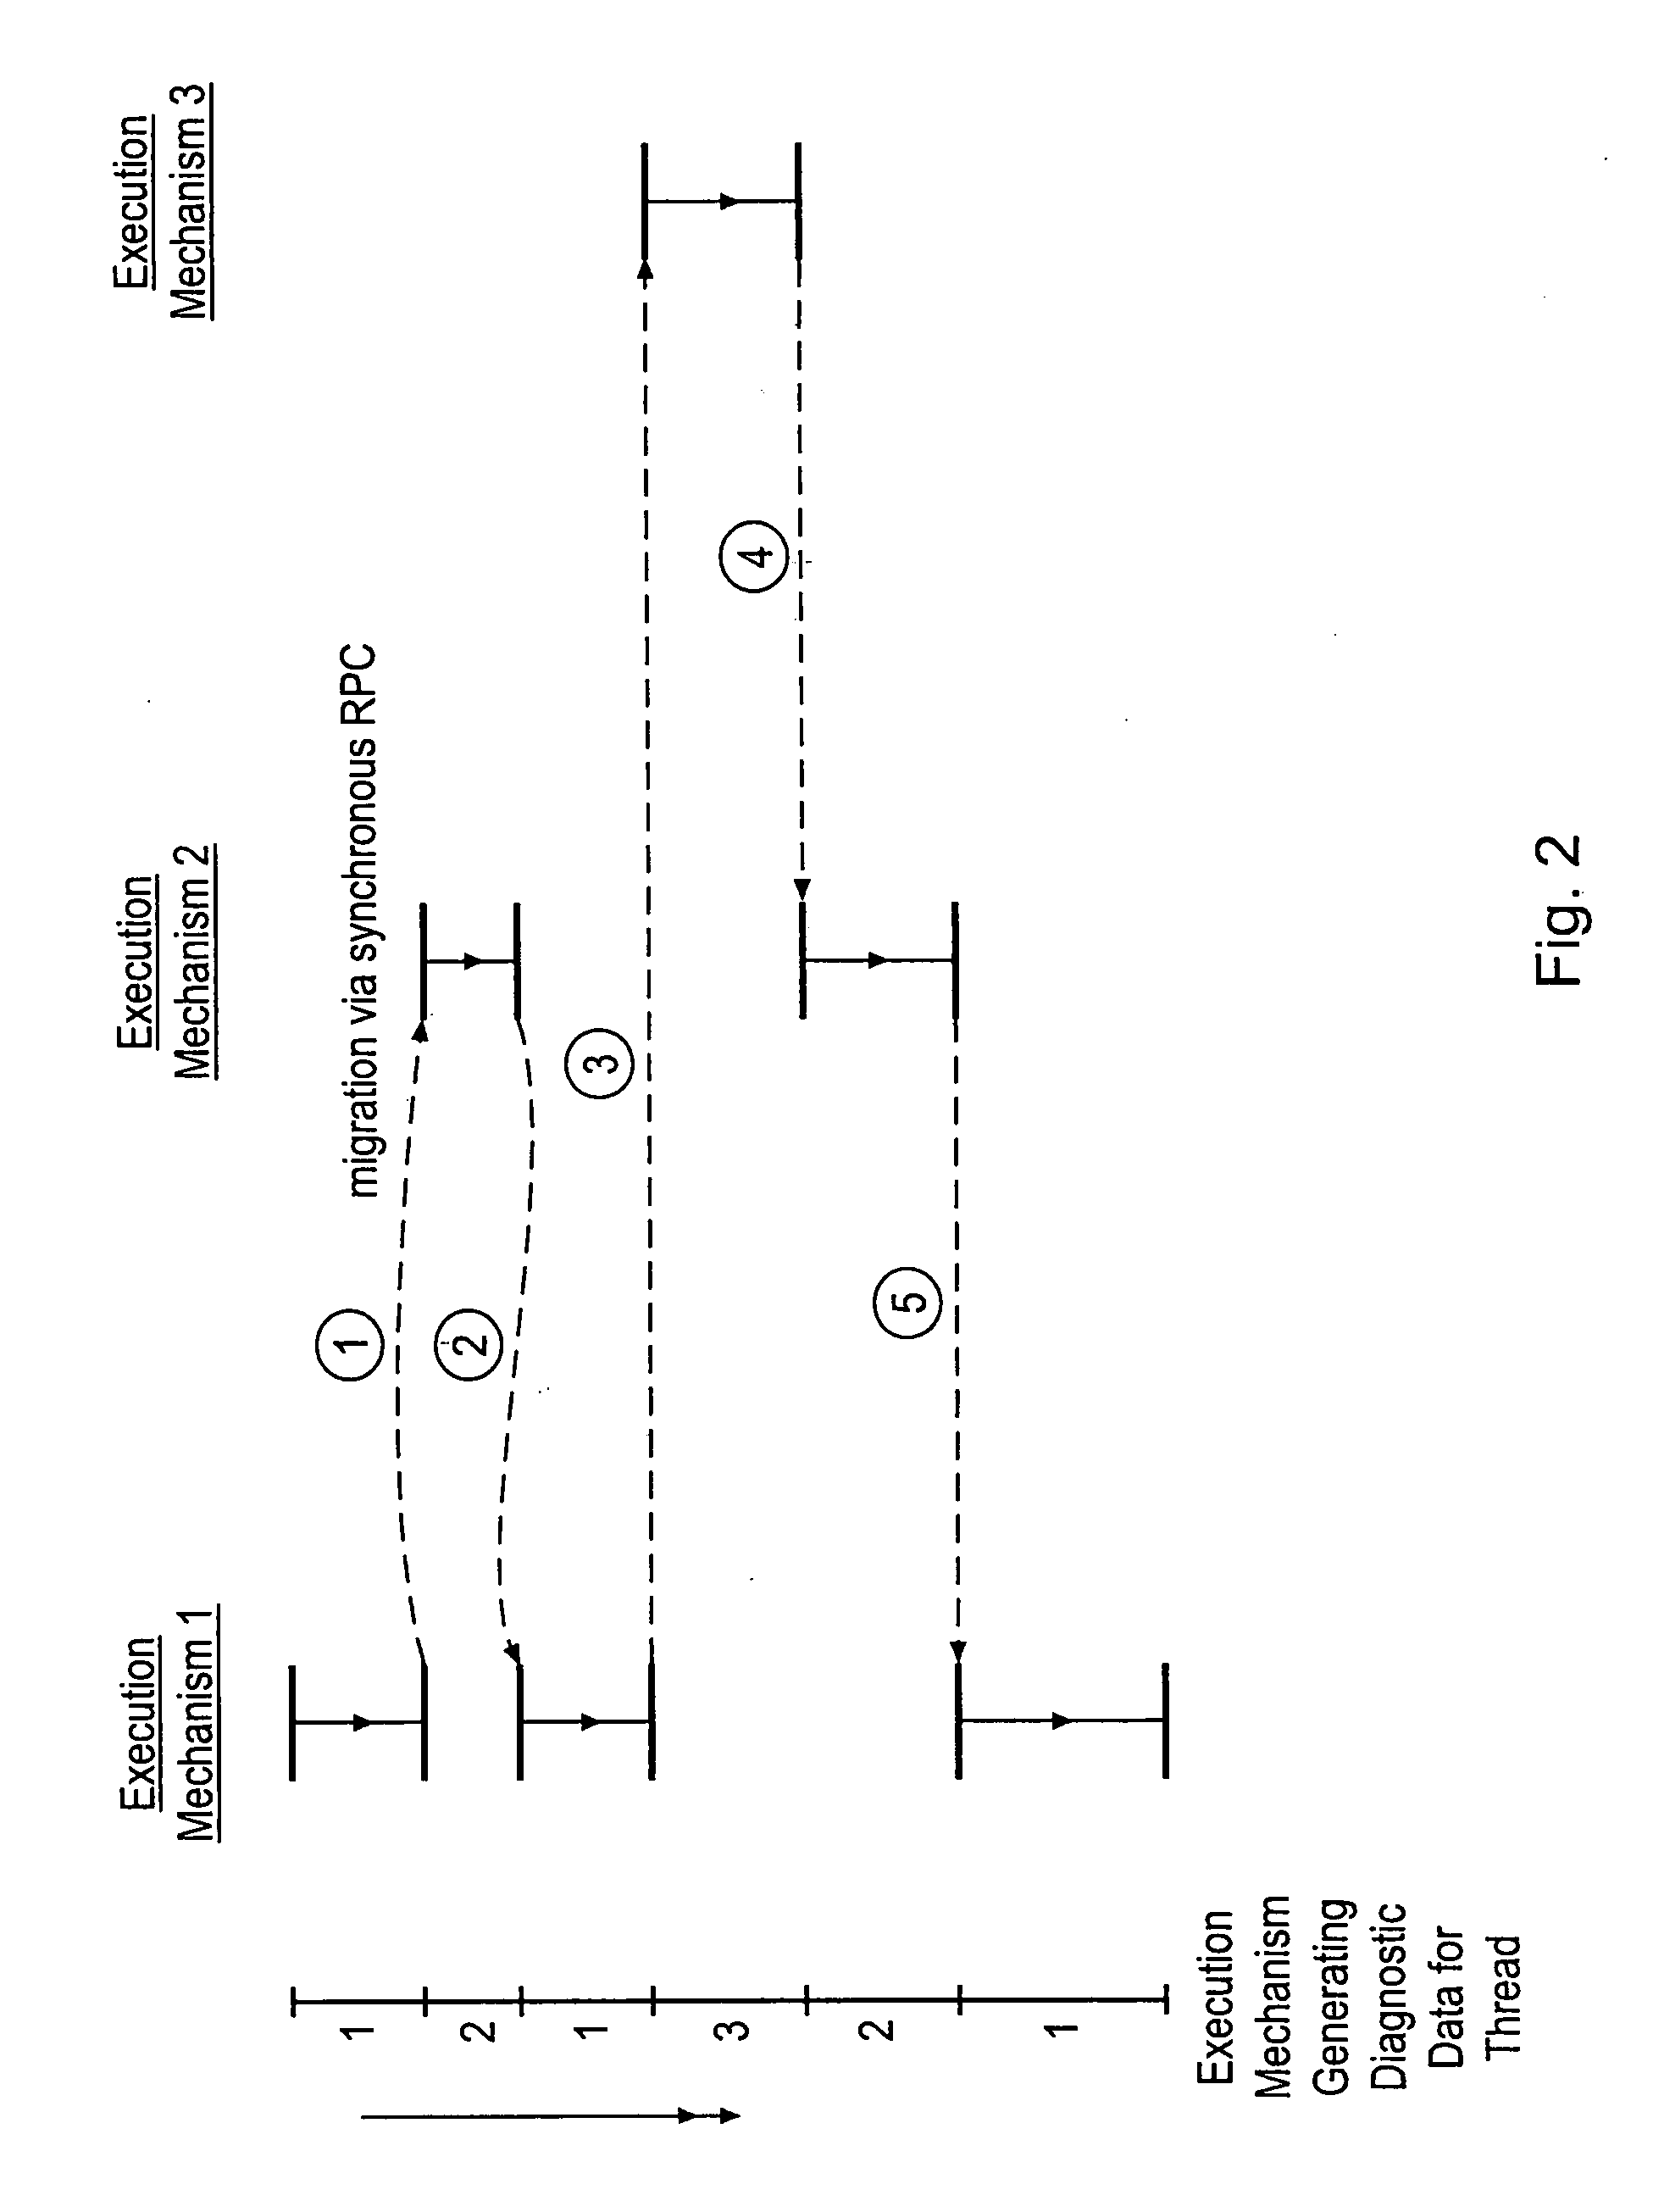 Performing diagnostic operations upon an asymmetric multiprocessor apparatus